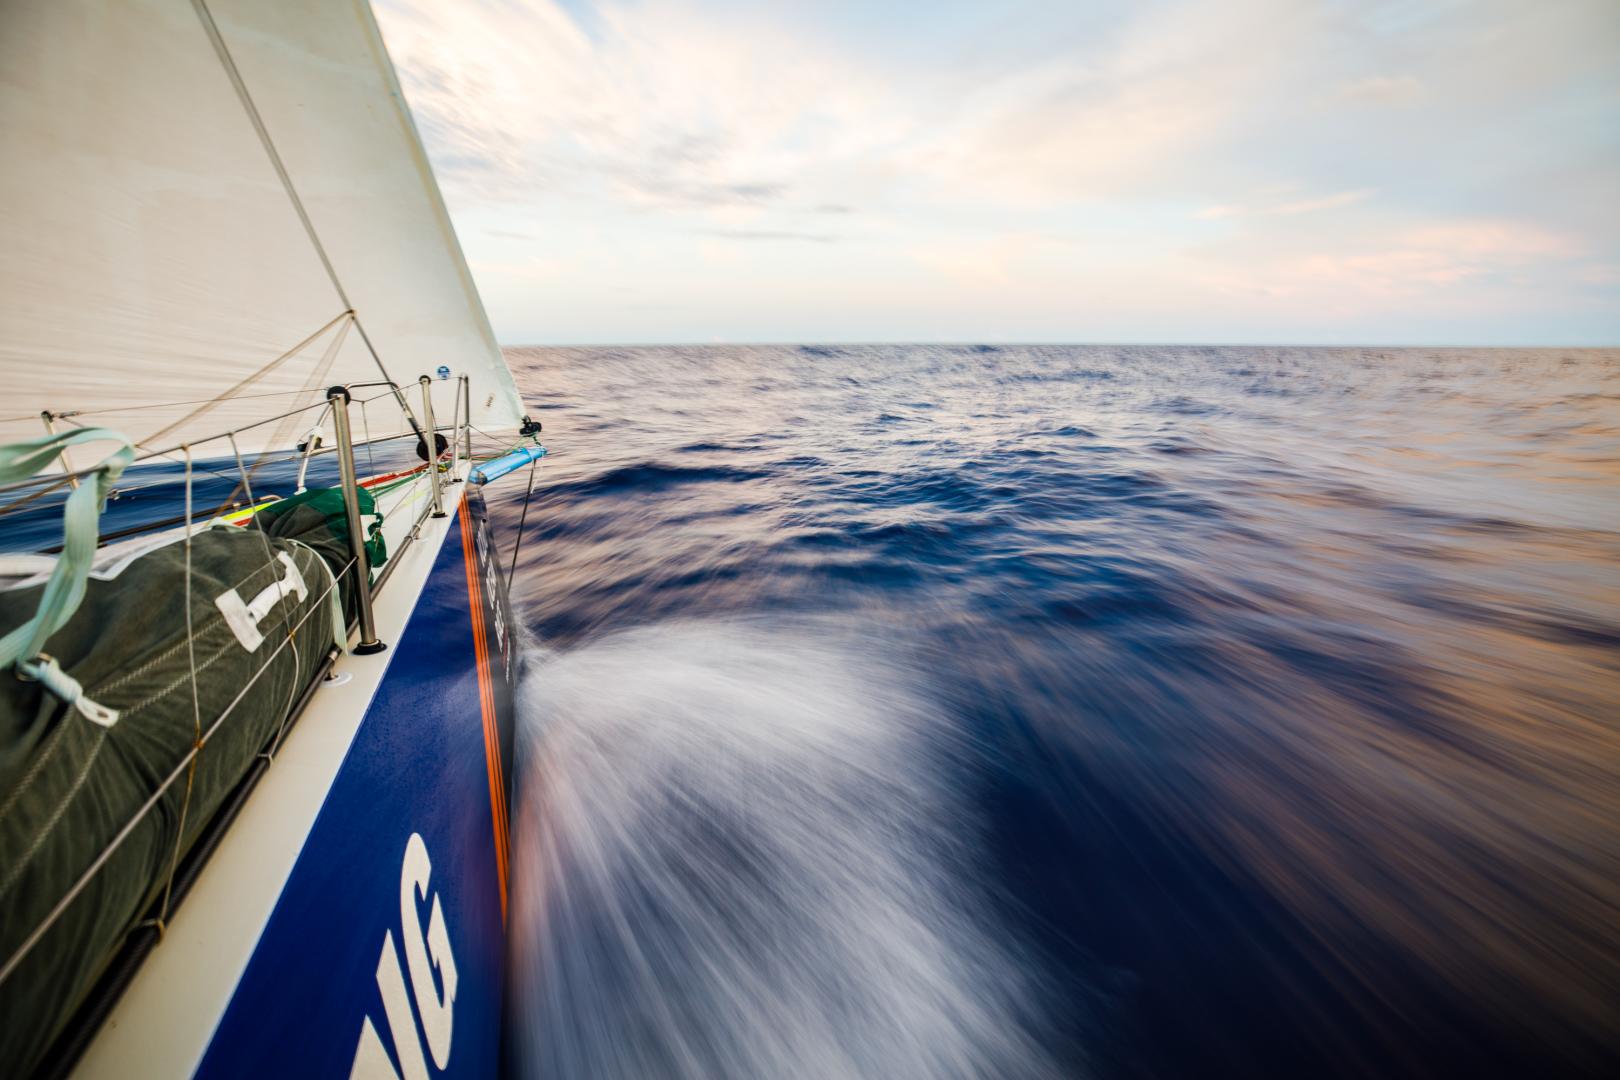 Leg 4, Melbourne to Hong Kong, day 10, Vestas 11th Hour finally stretching her legs again, revelling in fresh winds on the drive north towards the Equator and northeast Tradewinds.